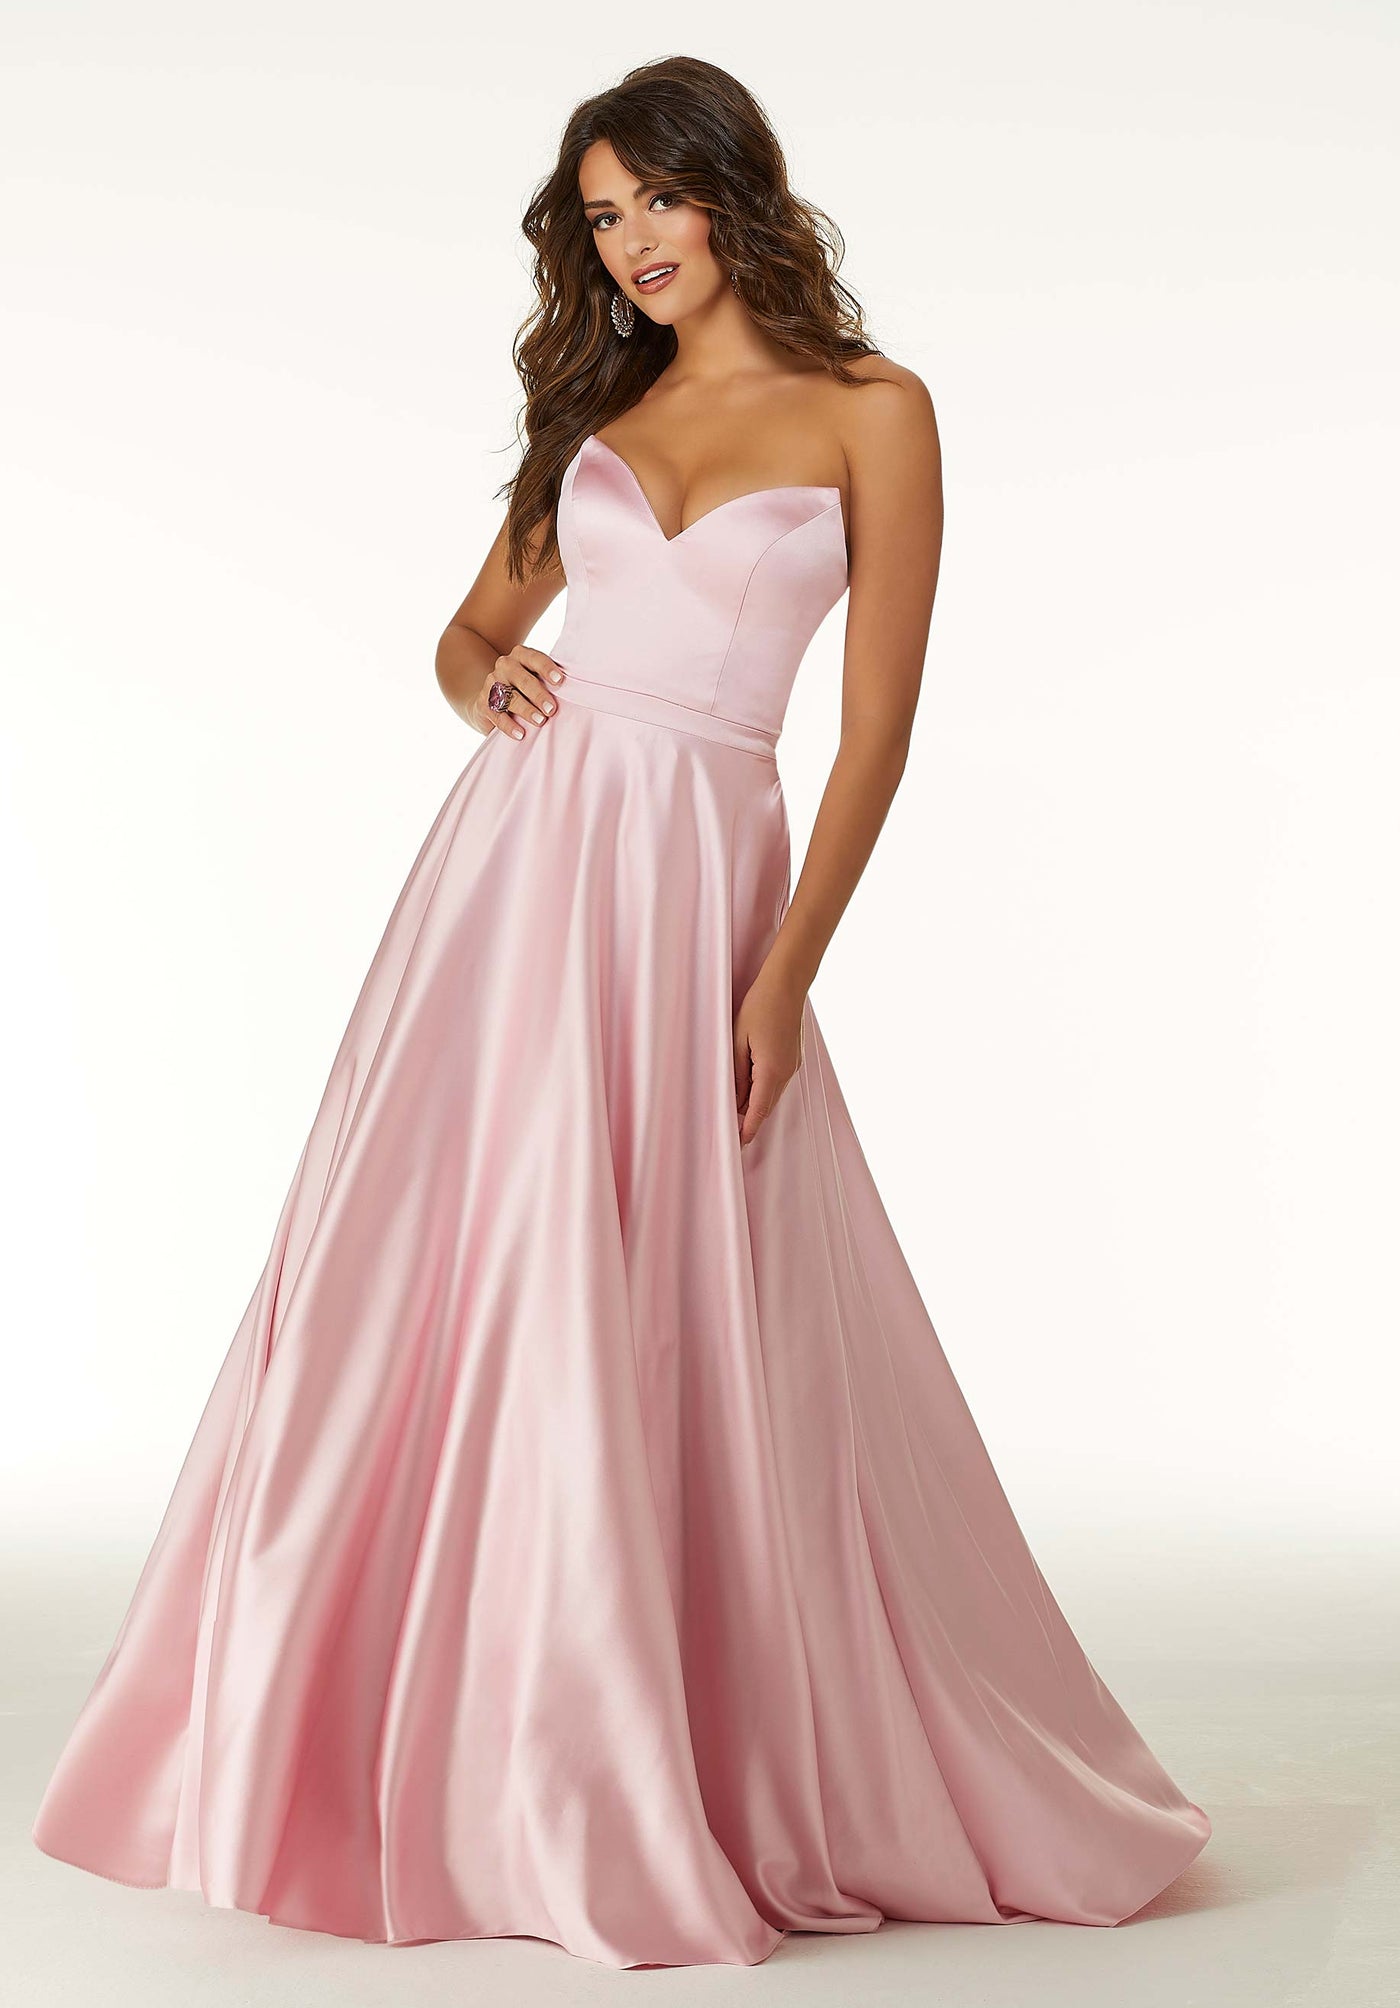 Mori Lee - 45043 Strapless Sweetheart Satin A-line Gown in Pink